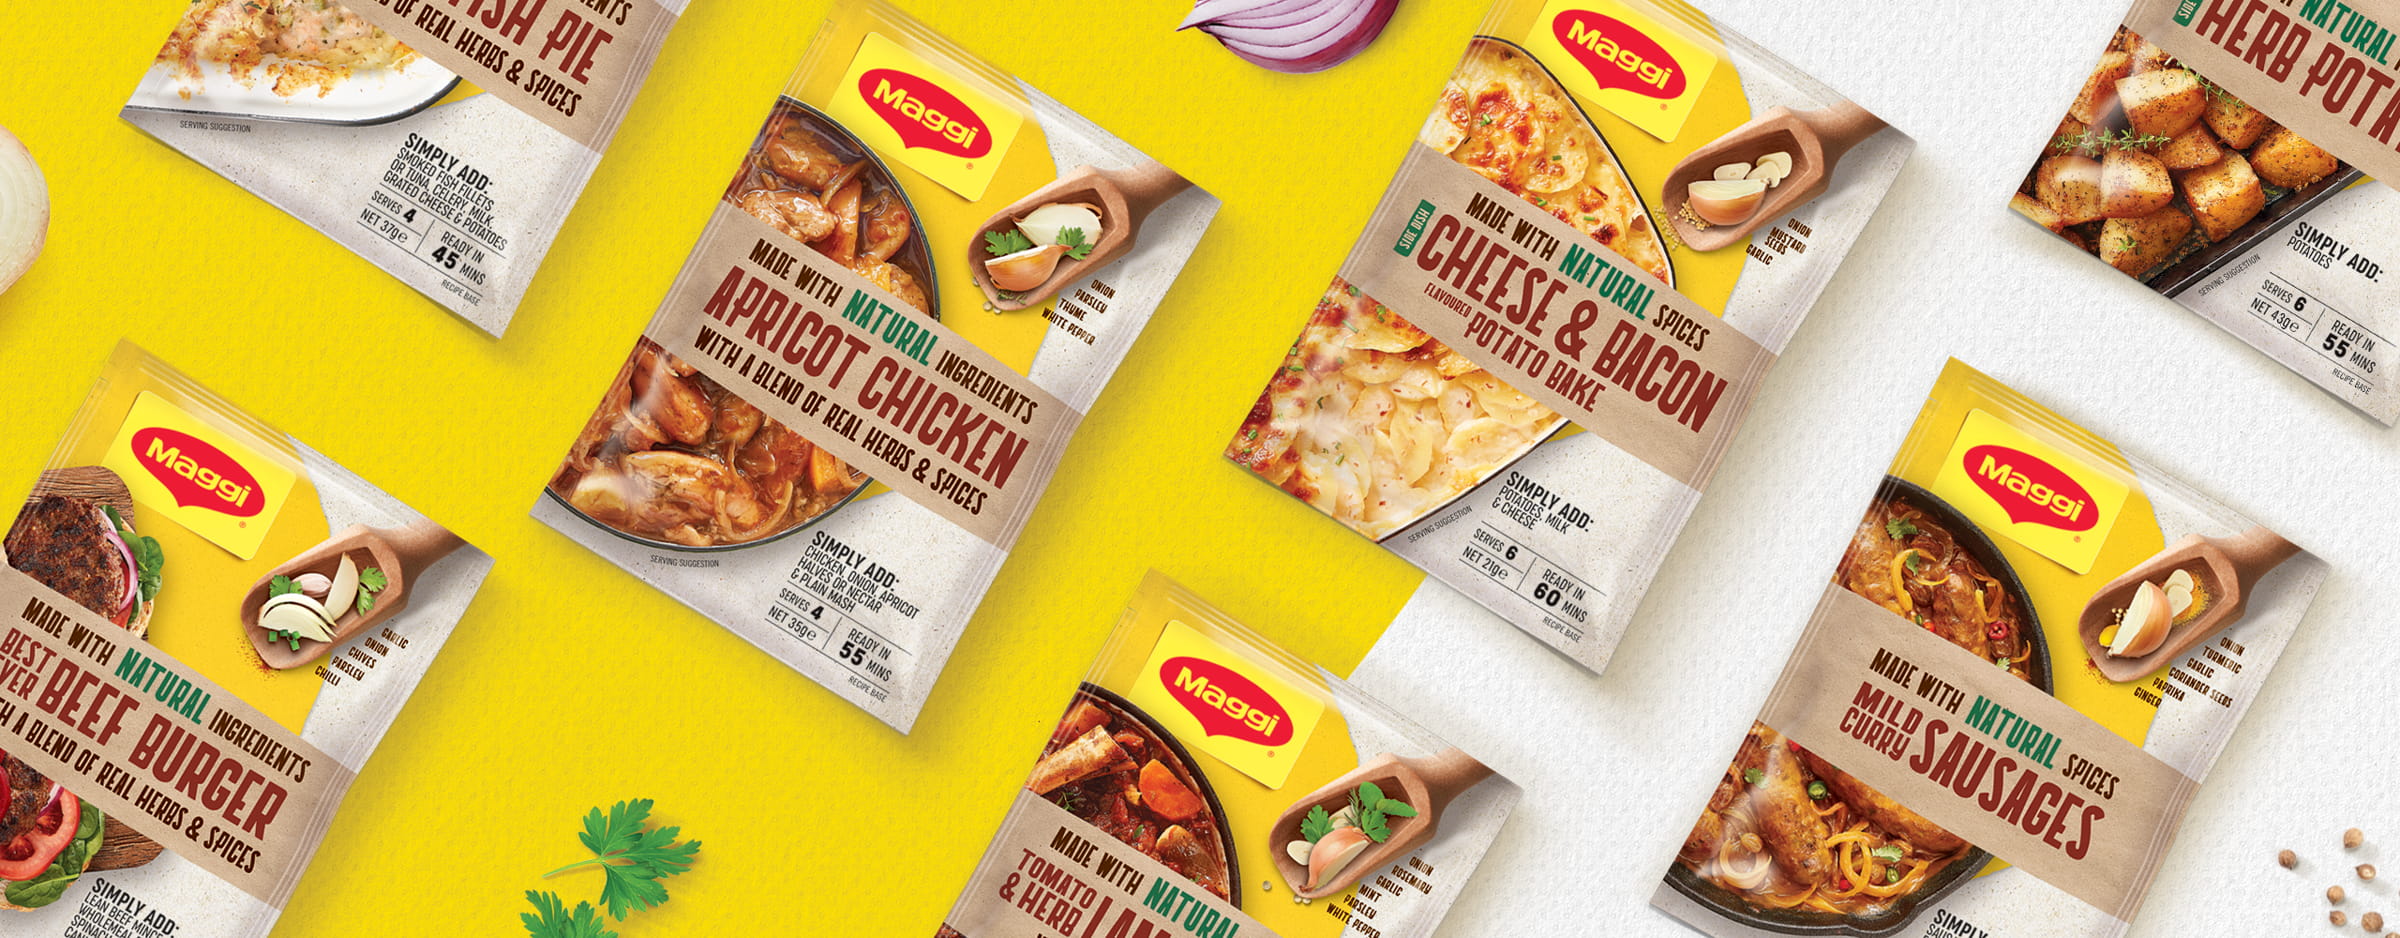 -nestle-packaging-redesign-branding-yellow-meals-boxer-and-co